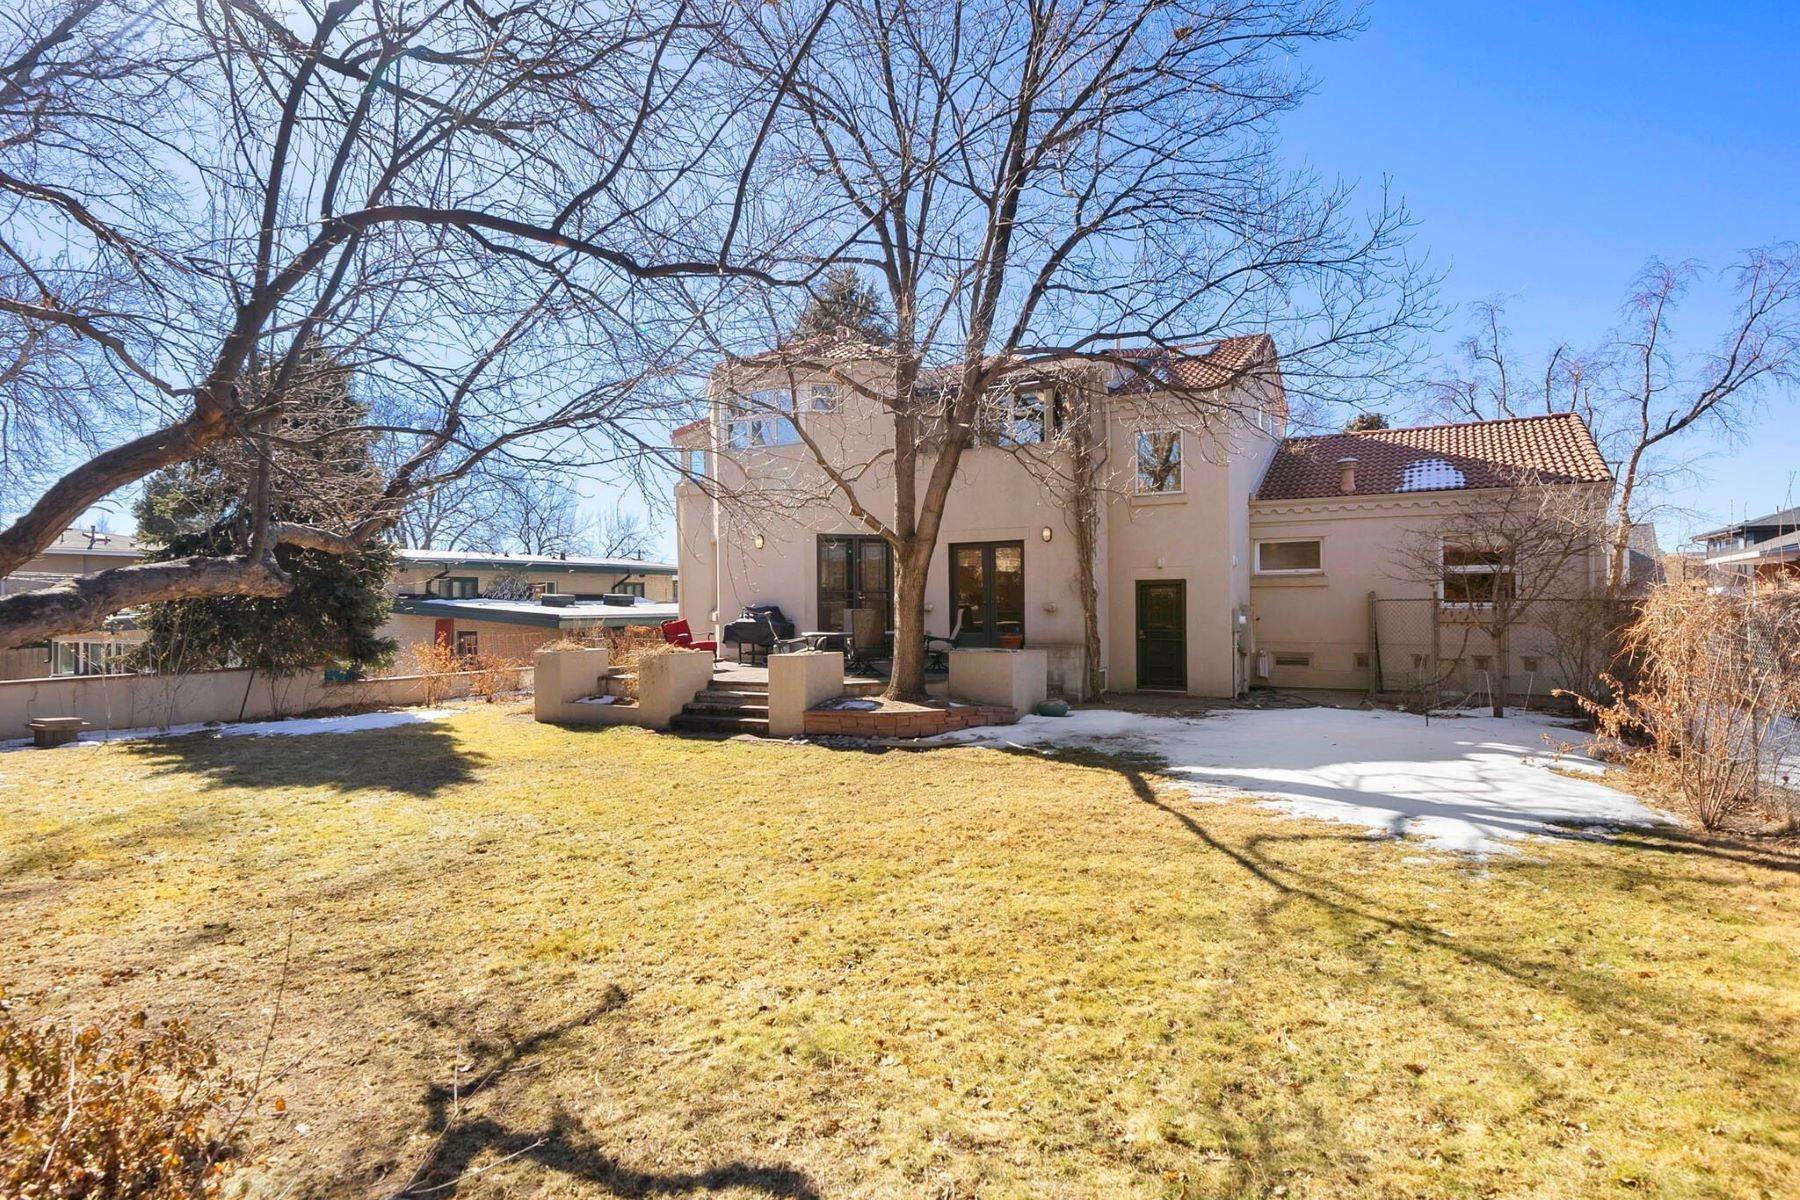 33. Single Family Homes for Active at Be romanced by this wonderful Hilltop home and opportunity! 46 S Albion Street Denver, Colorado 80246 United States